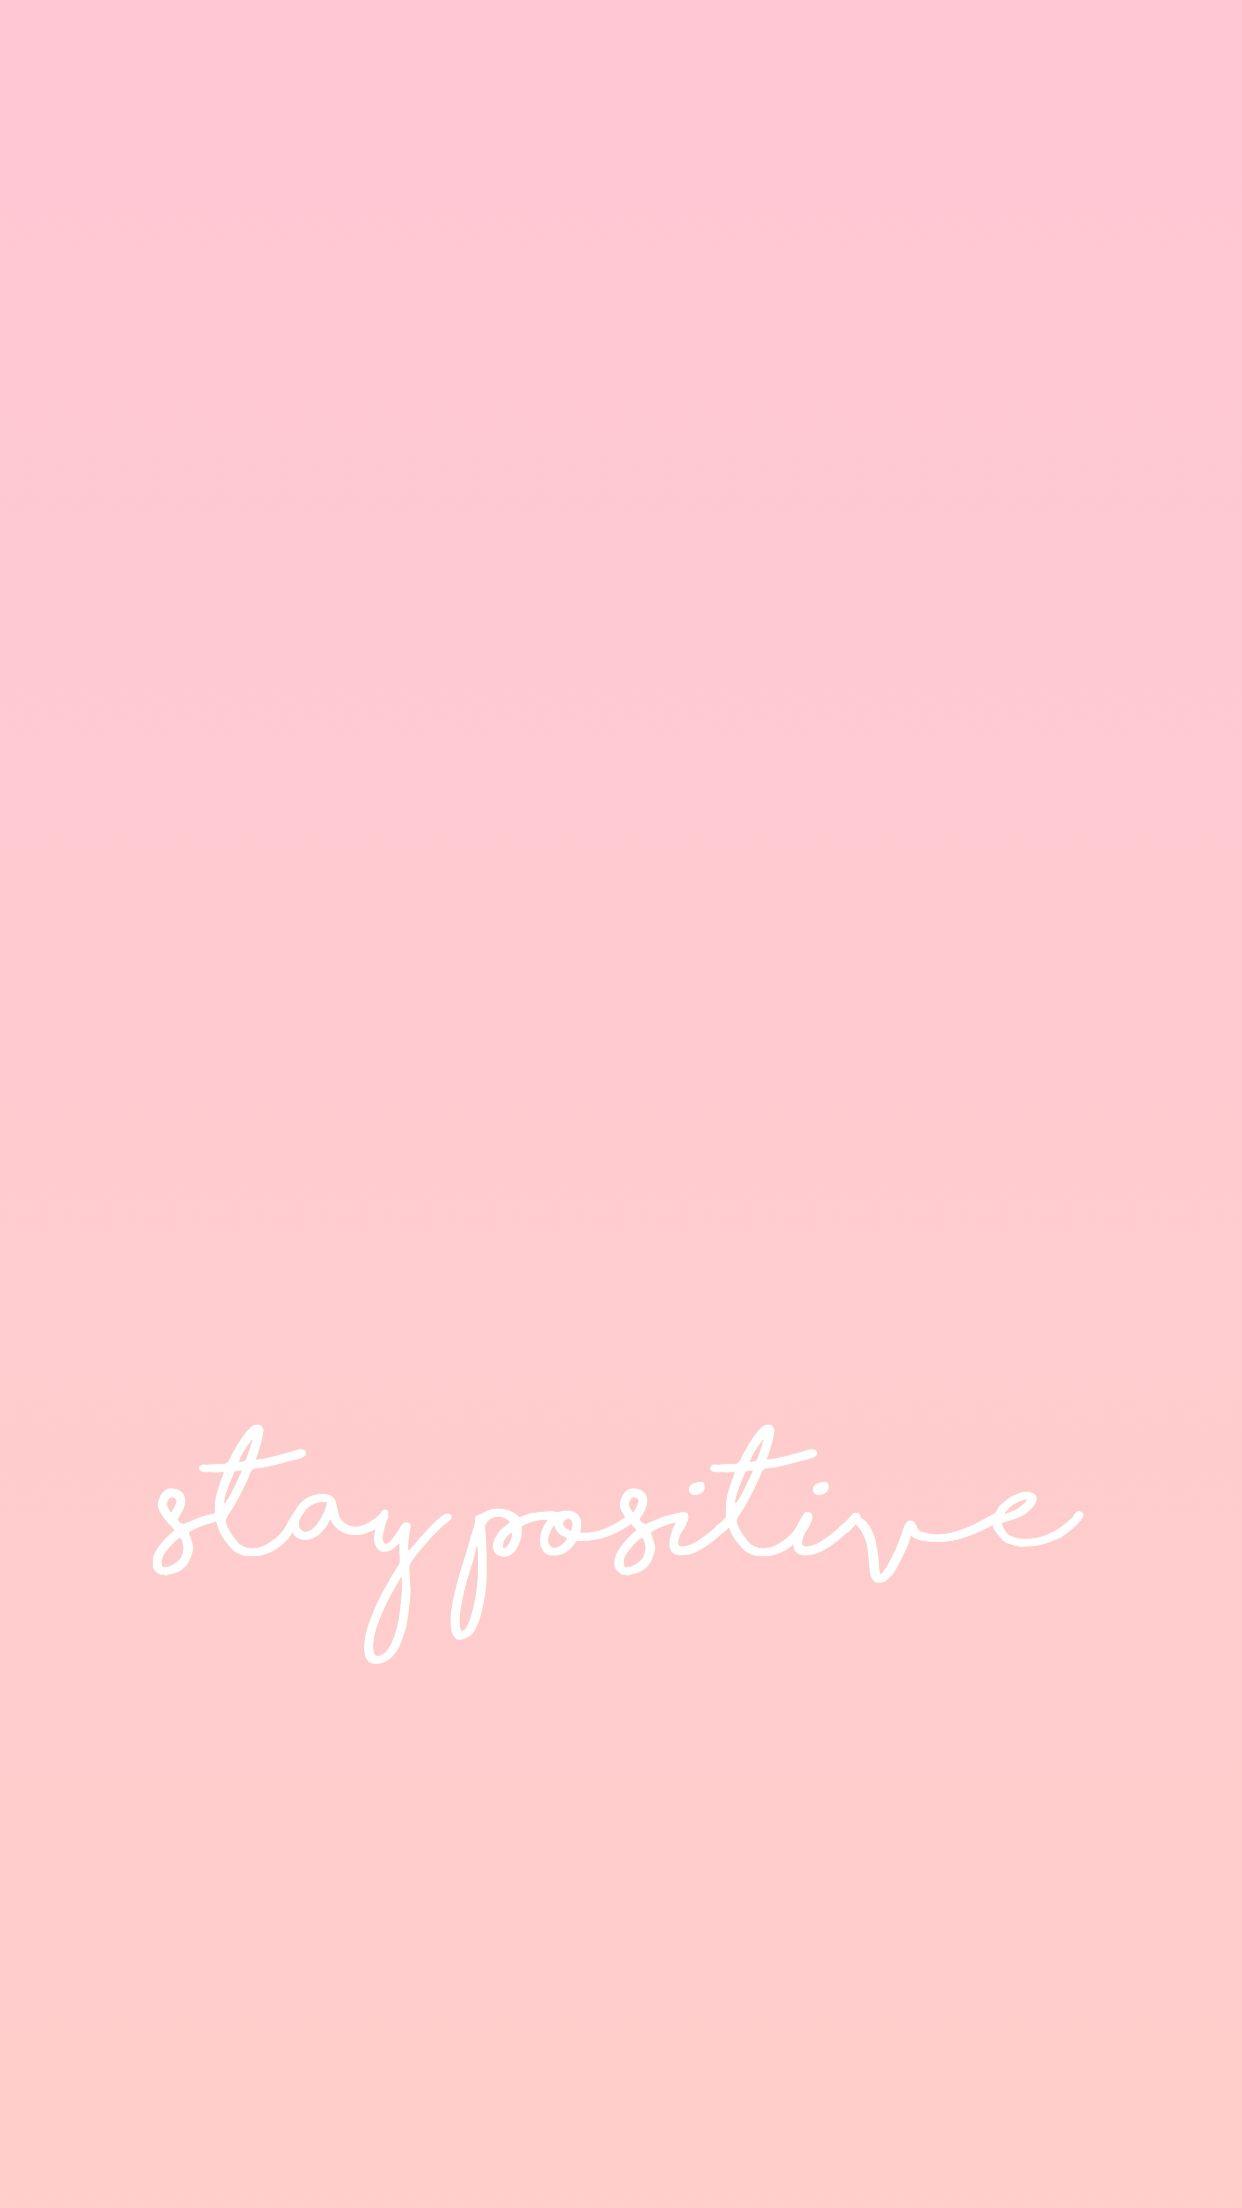 Stay Positive Wallpapers - Wallpaper Cave